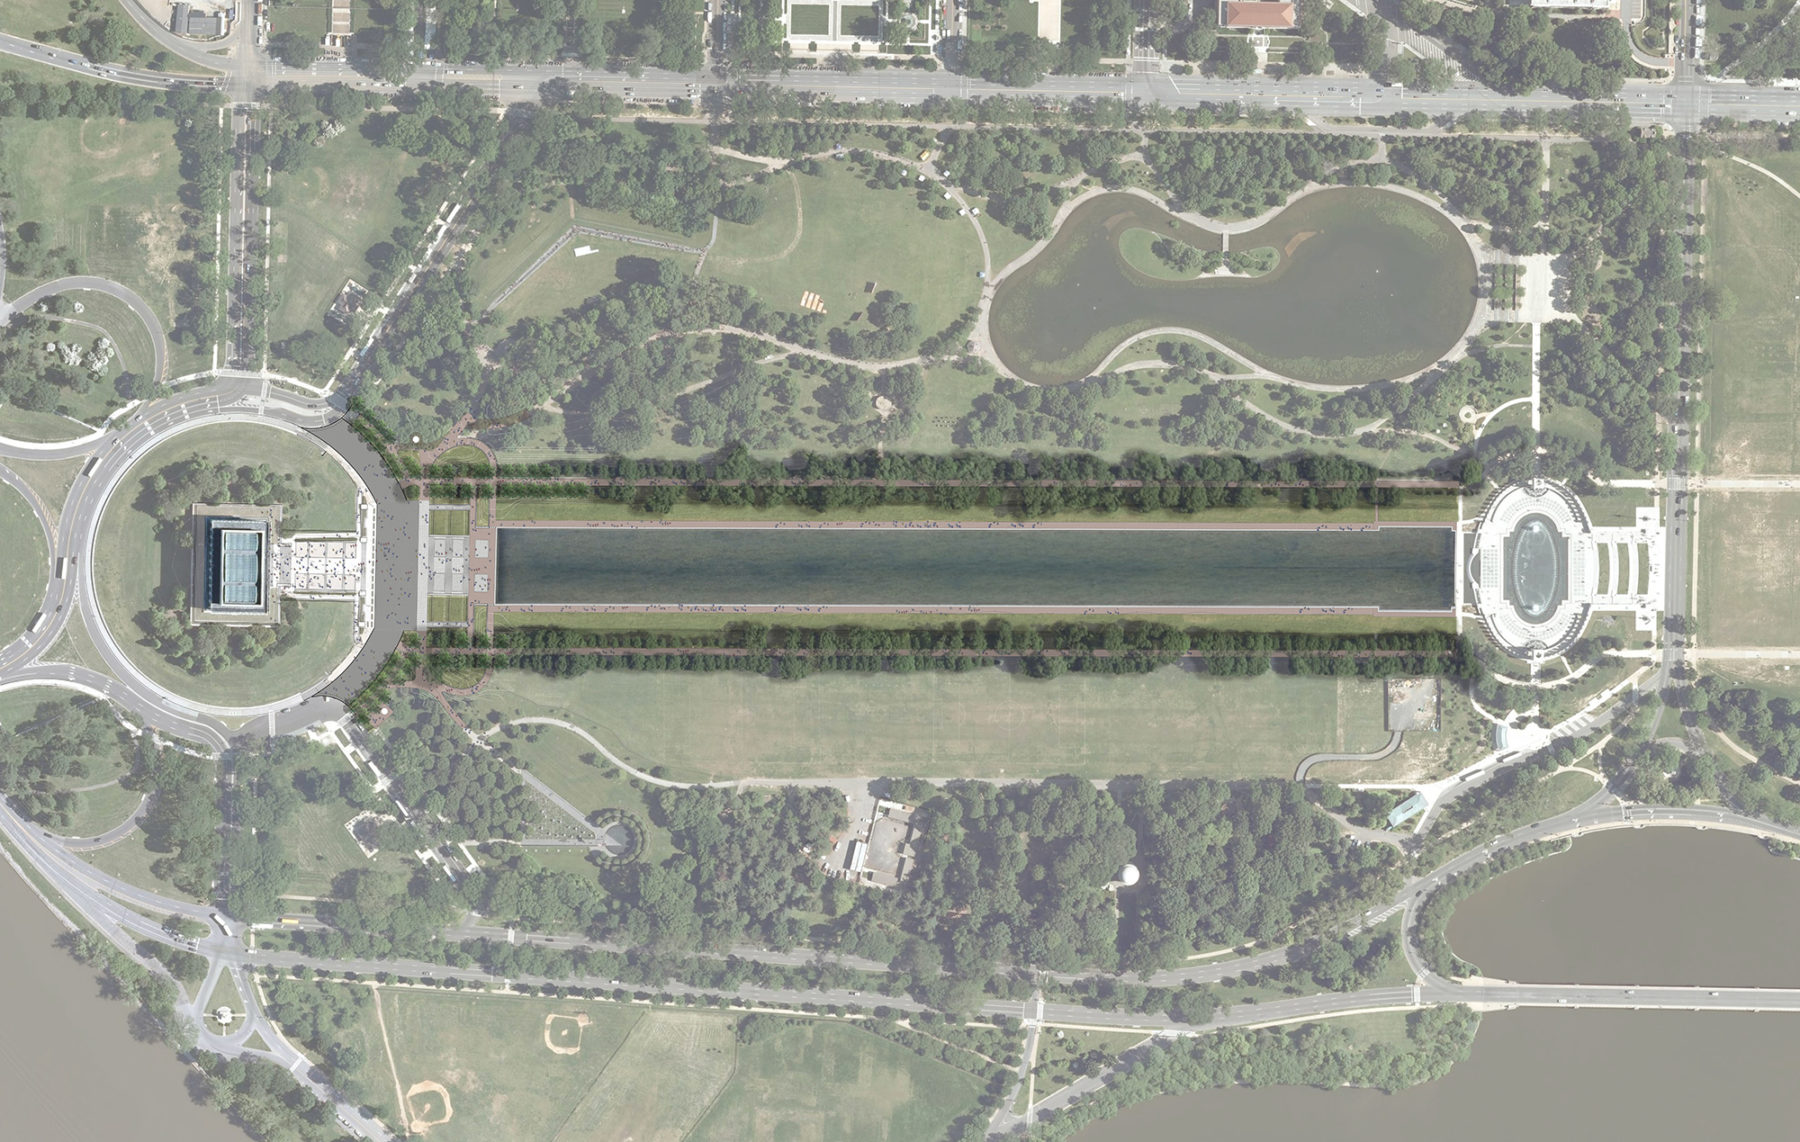 plan view diagram of national mall